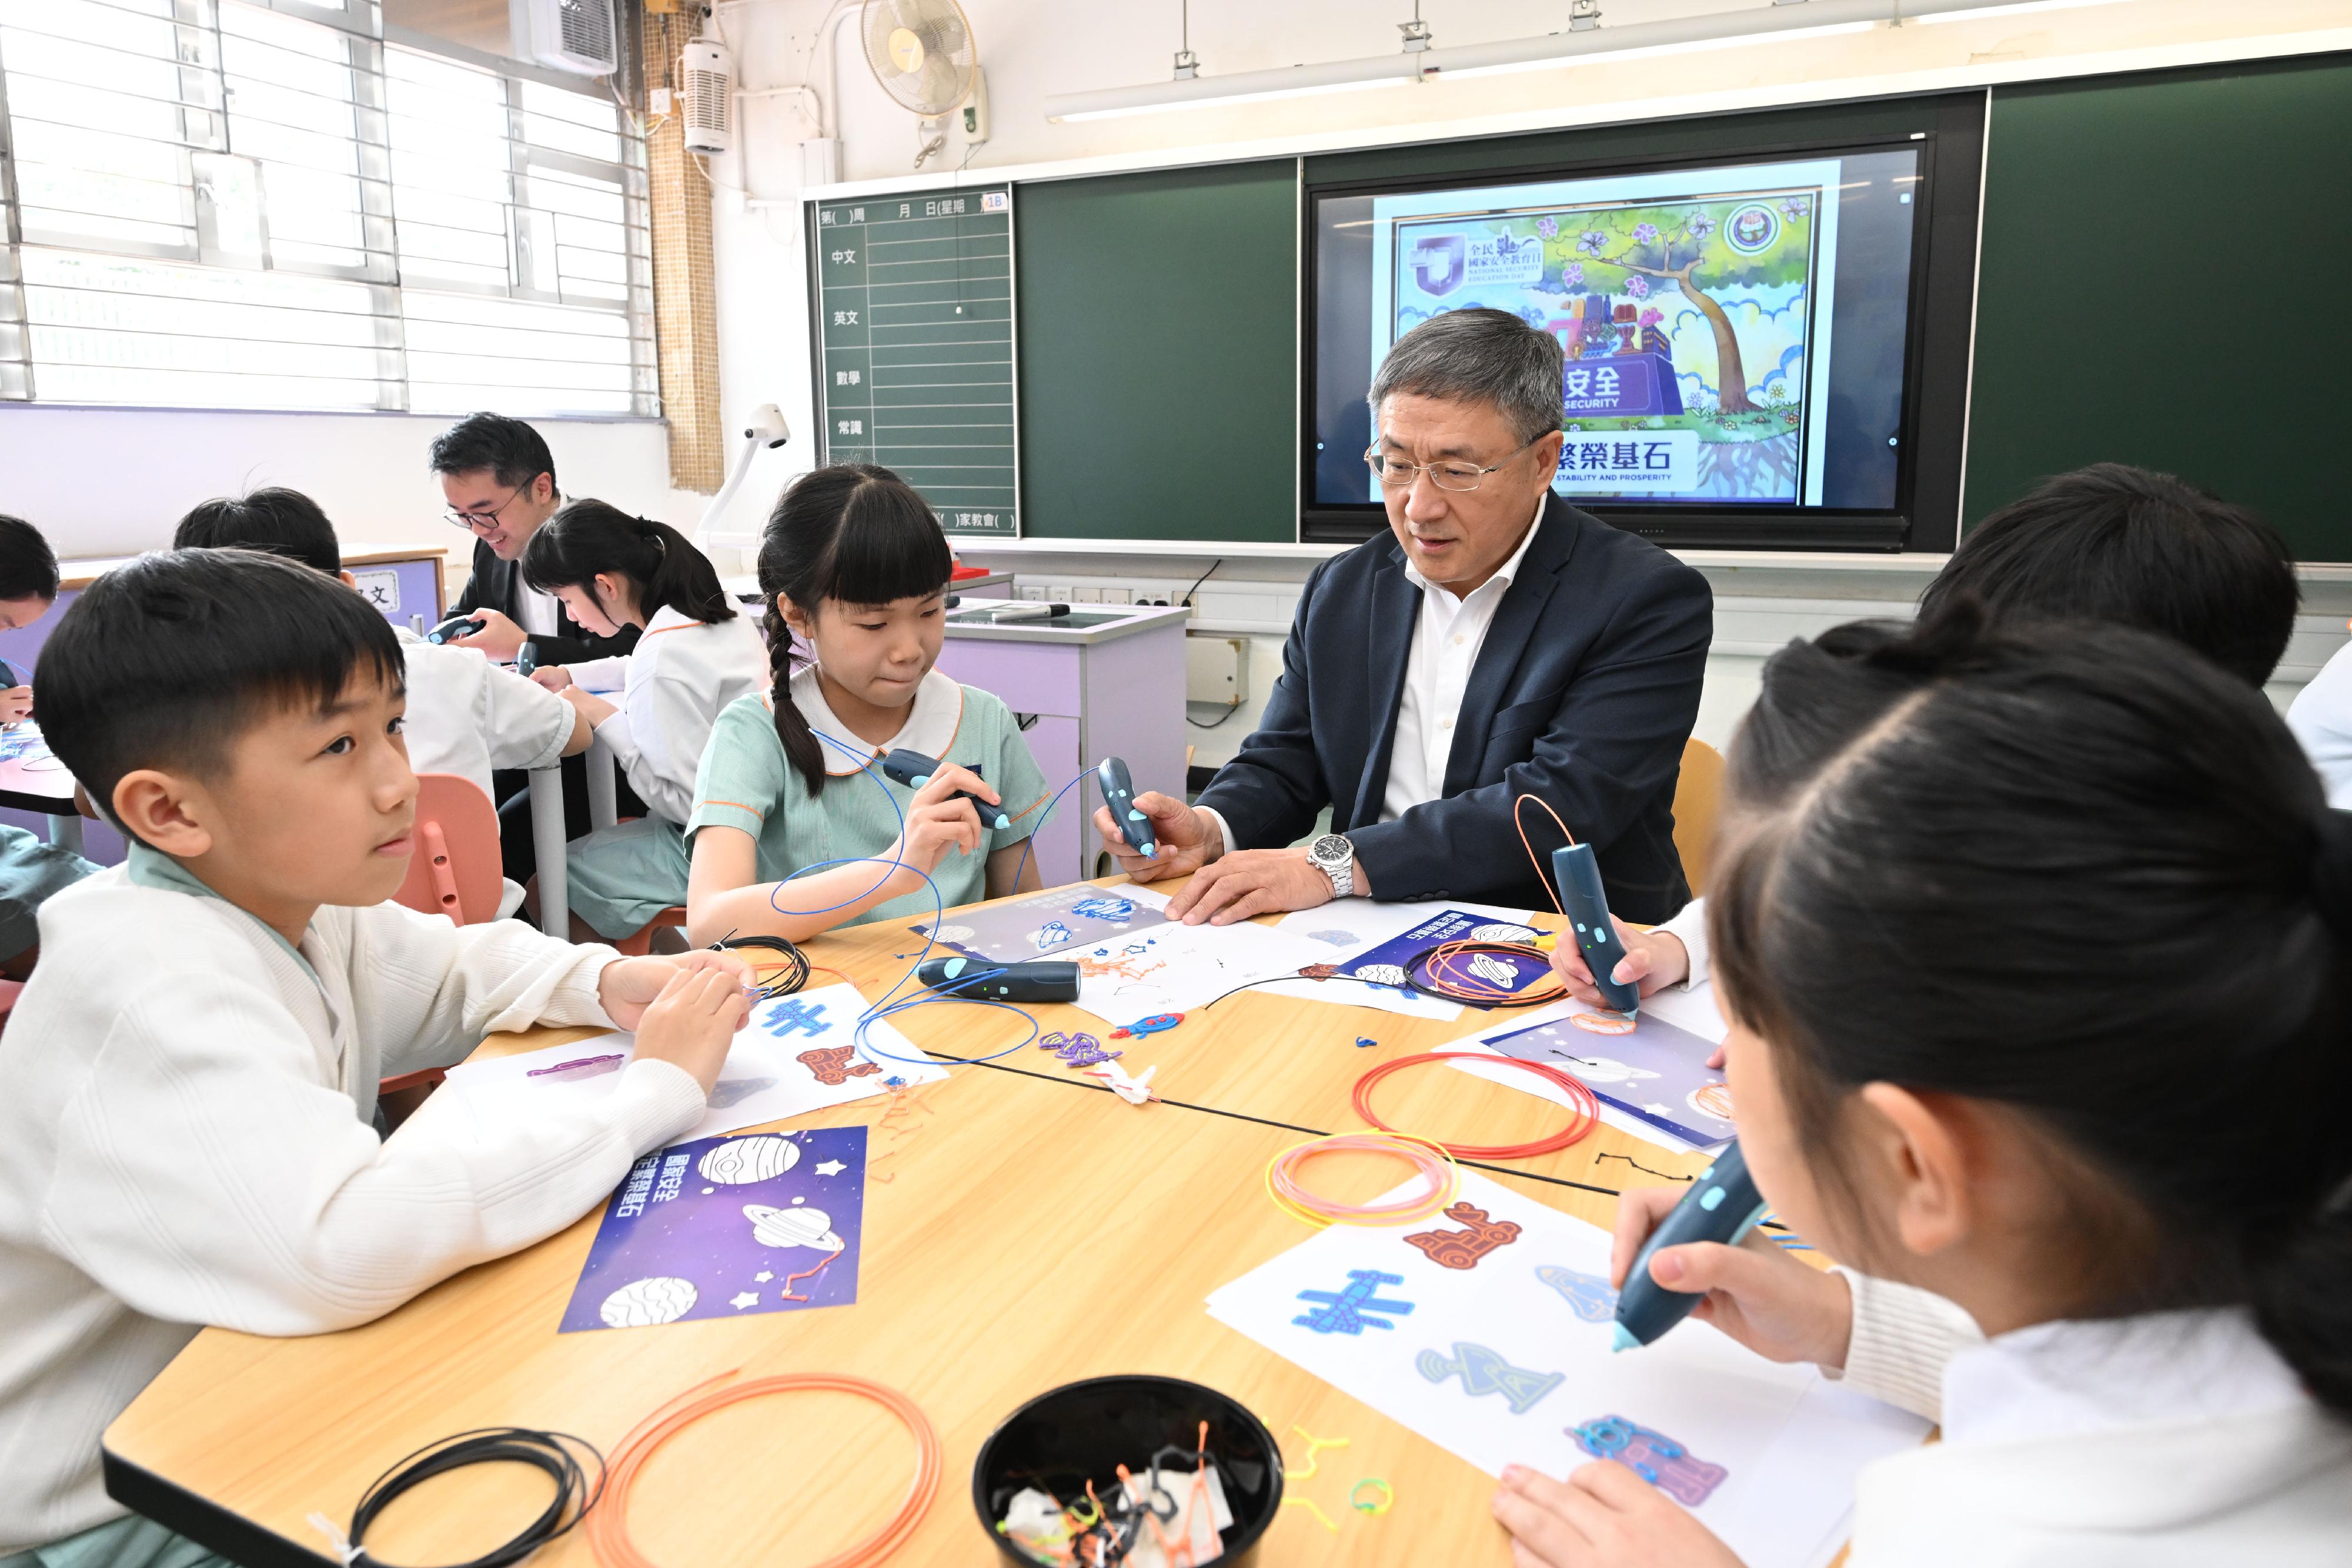 The Deputy Chief Secretary for Administration, Mr Cheuk Wing-hing, takes part in a workshop on 3D printing with students at Shatin Government Primary School today (April 13).